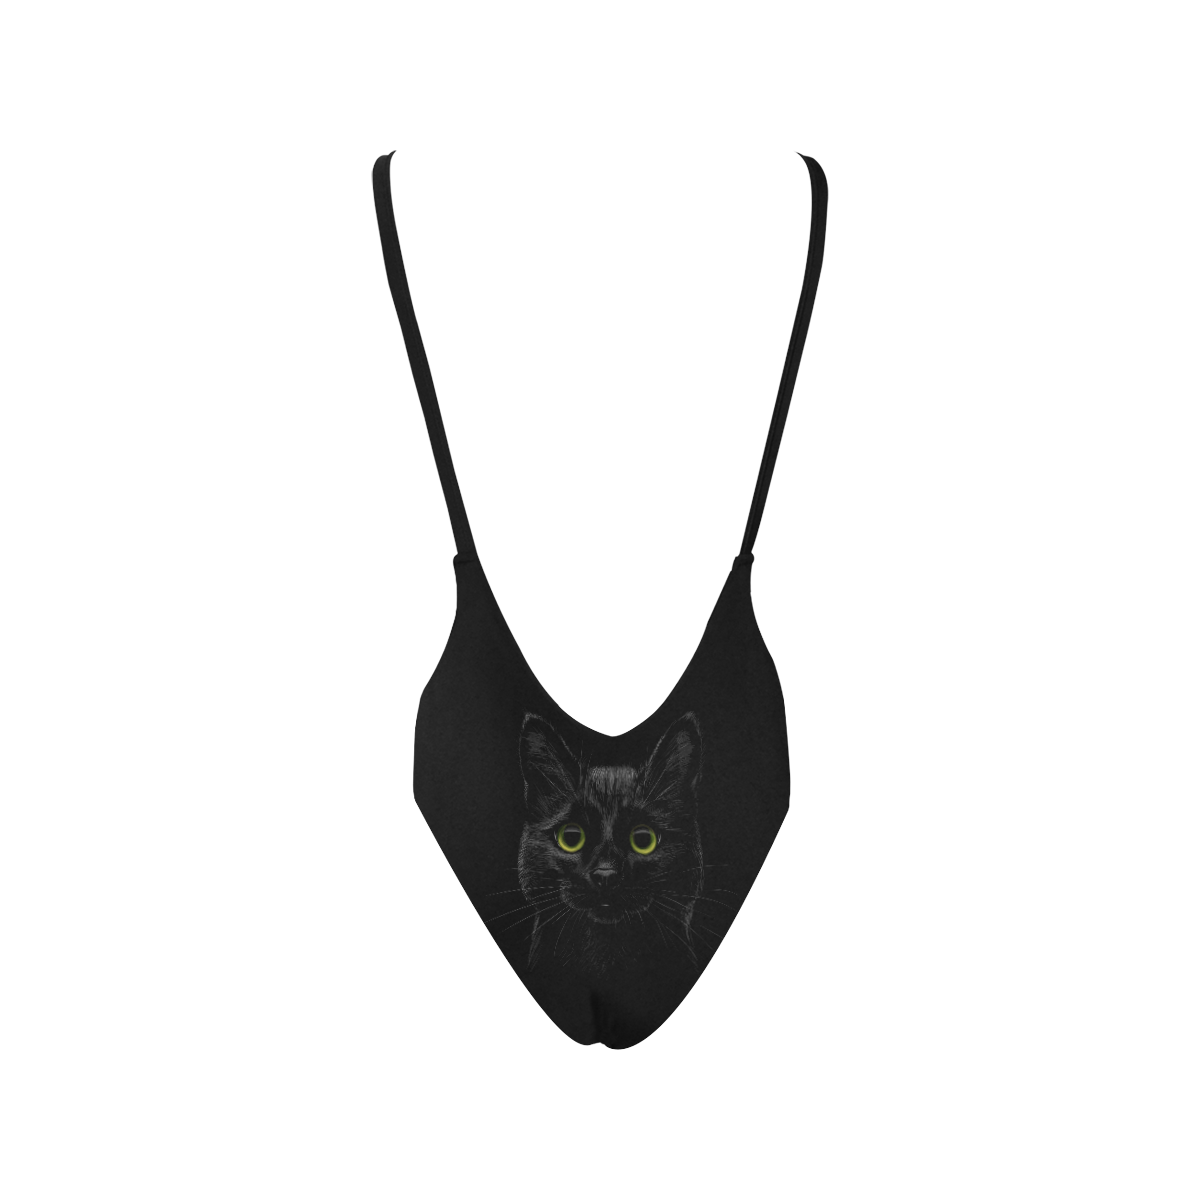 Black Cat Sexy Low Back One-Piece Swimsuit (Model S09)